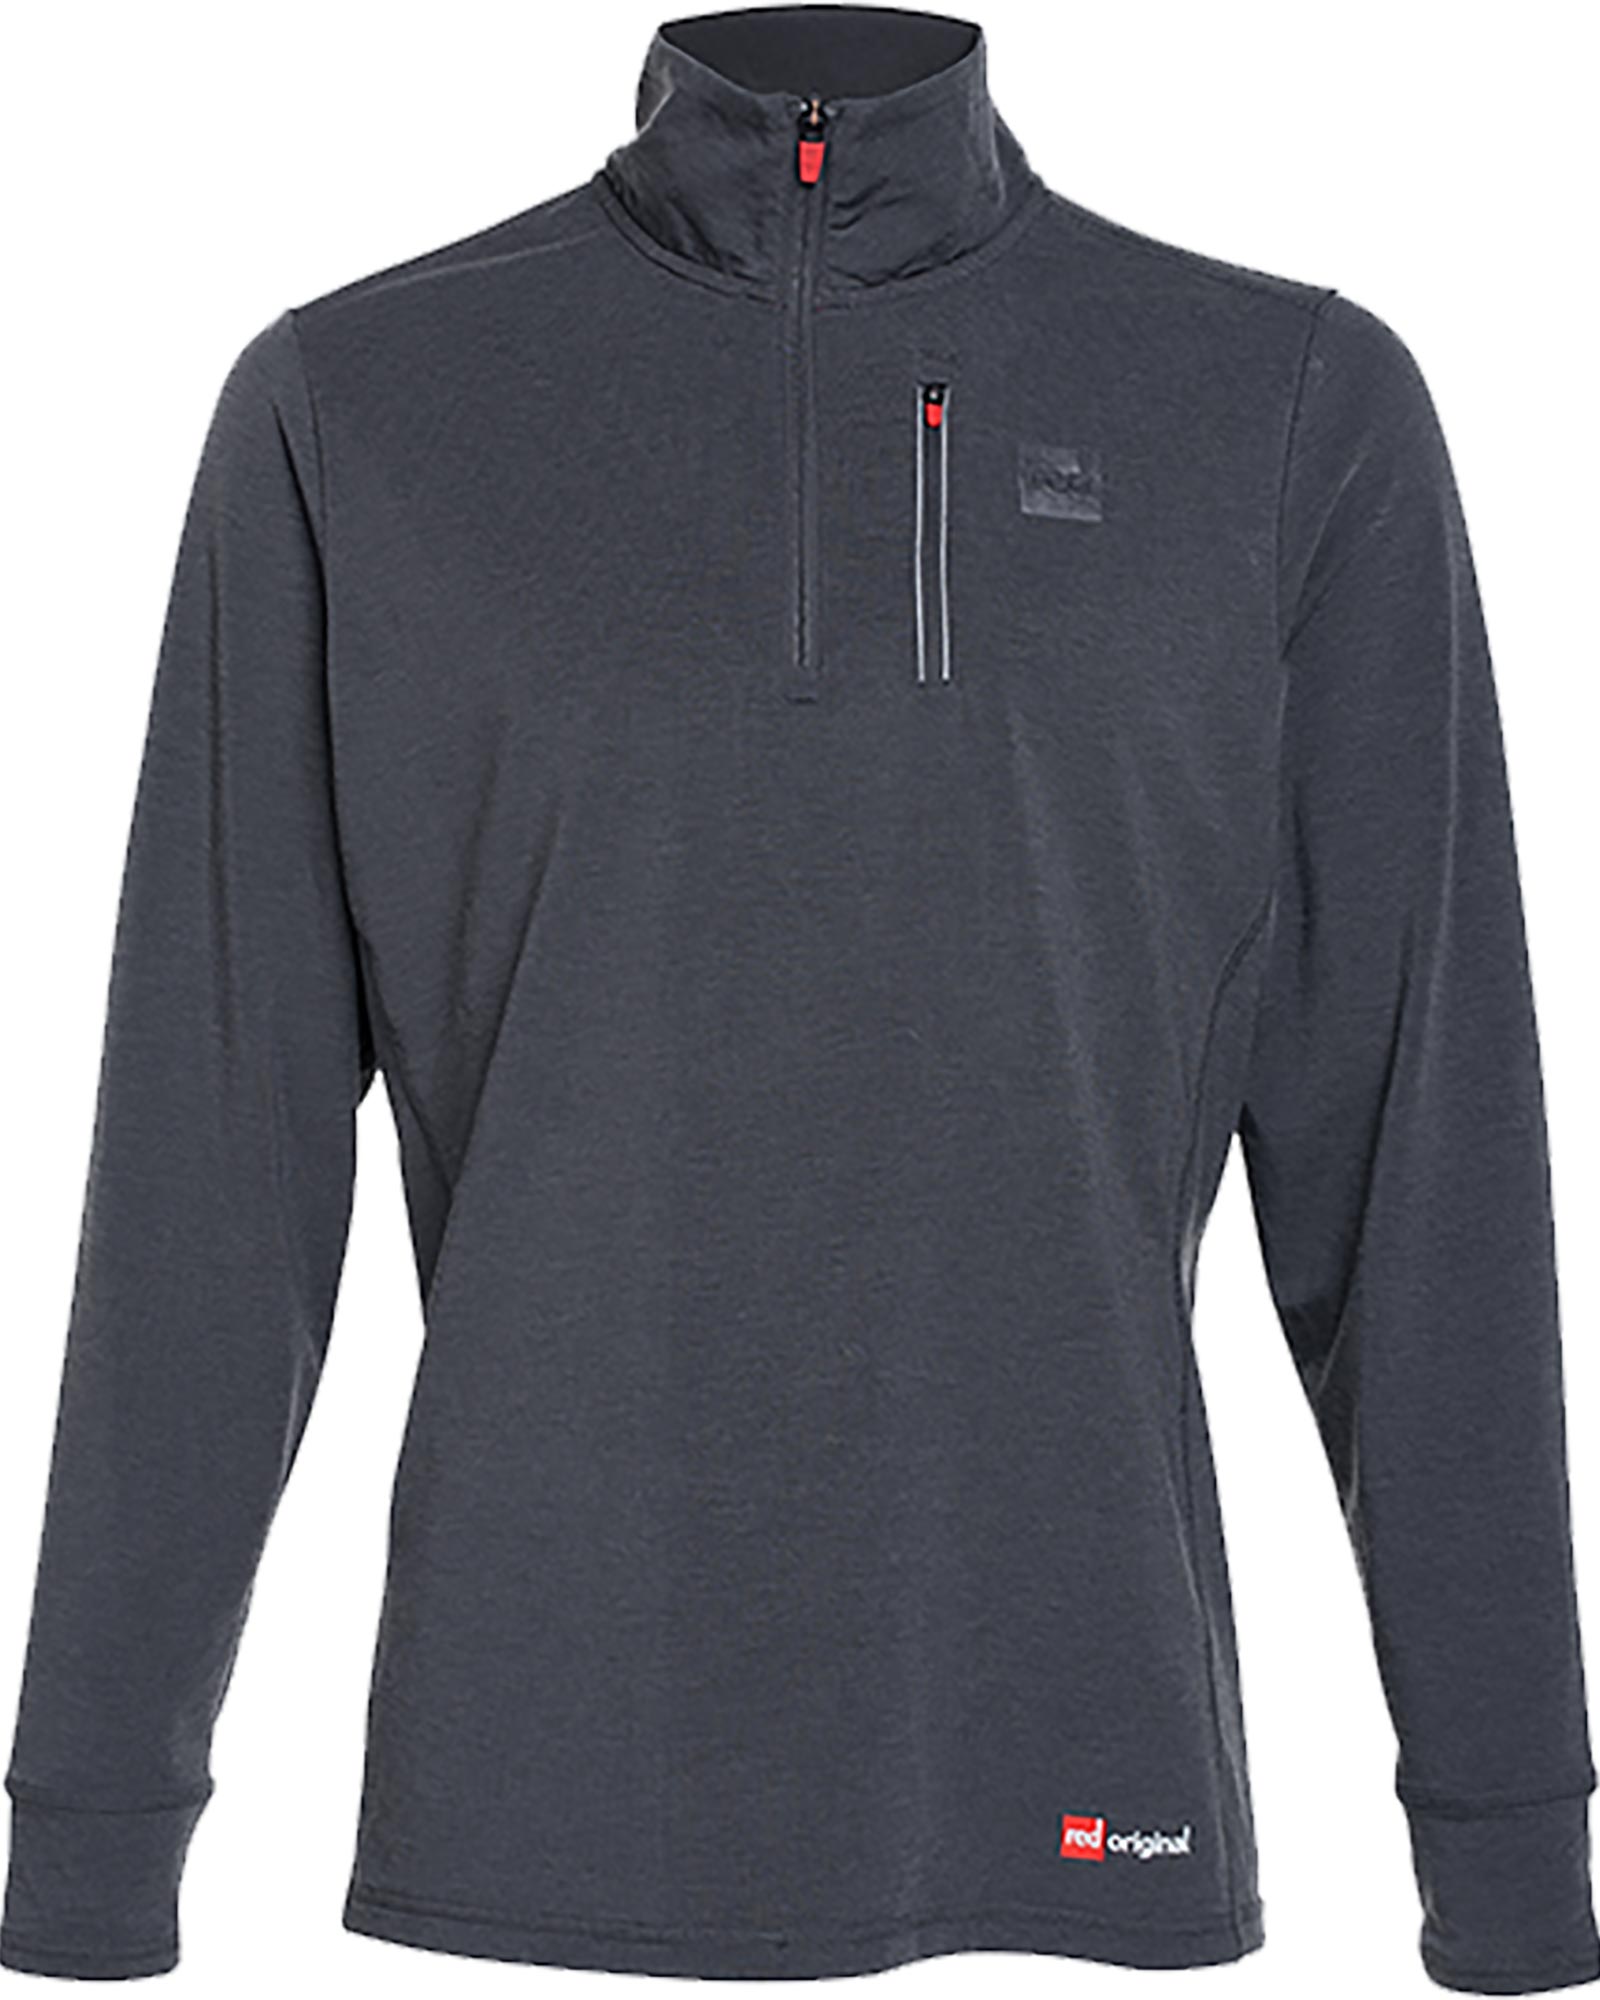 Red Performance Men’s Top Layer - Grey XL